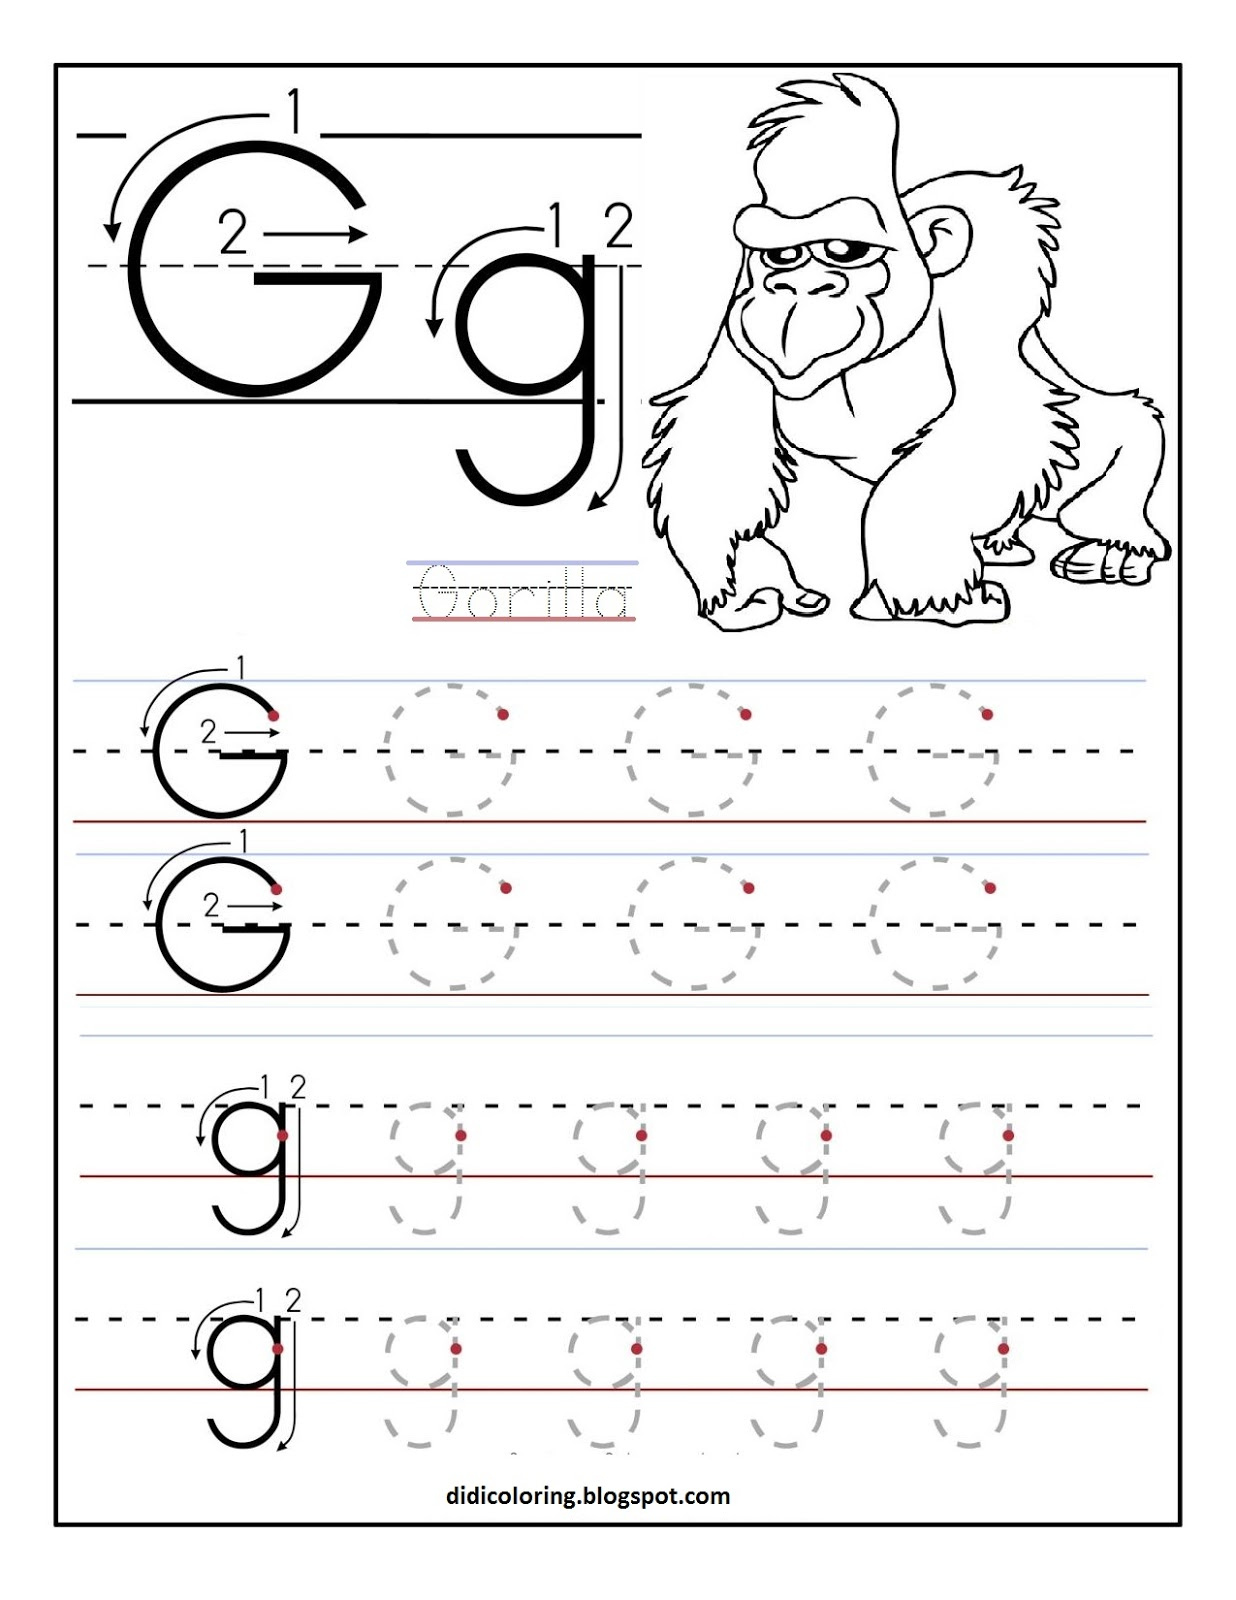 Free Printable Worksheet For Kids Best For Your Child To Learn And Write 